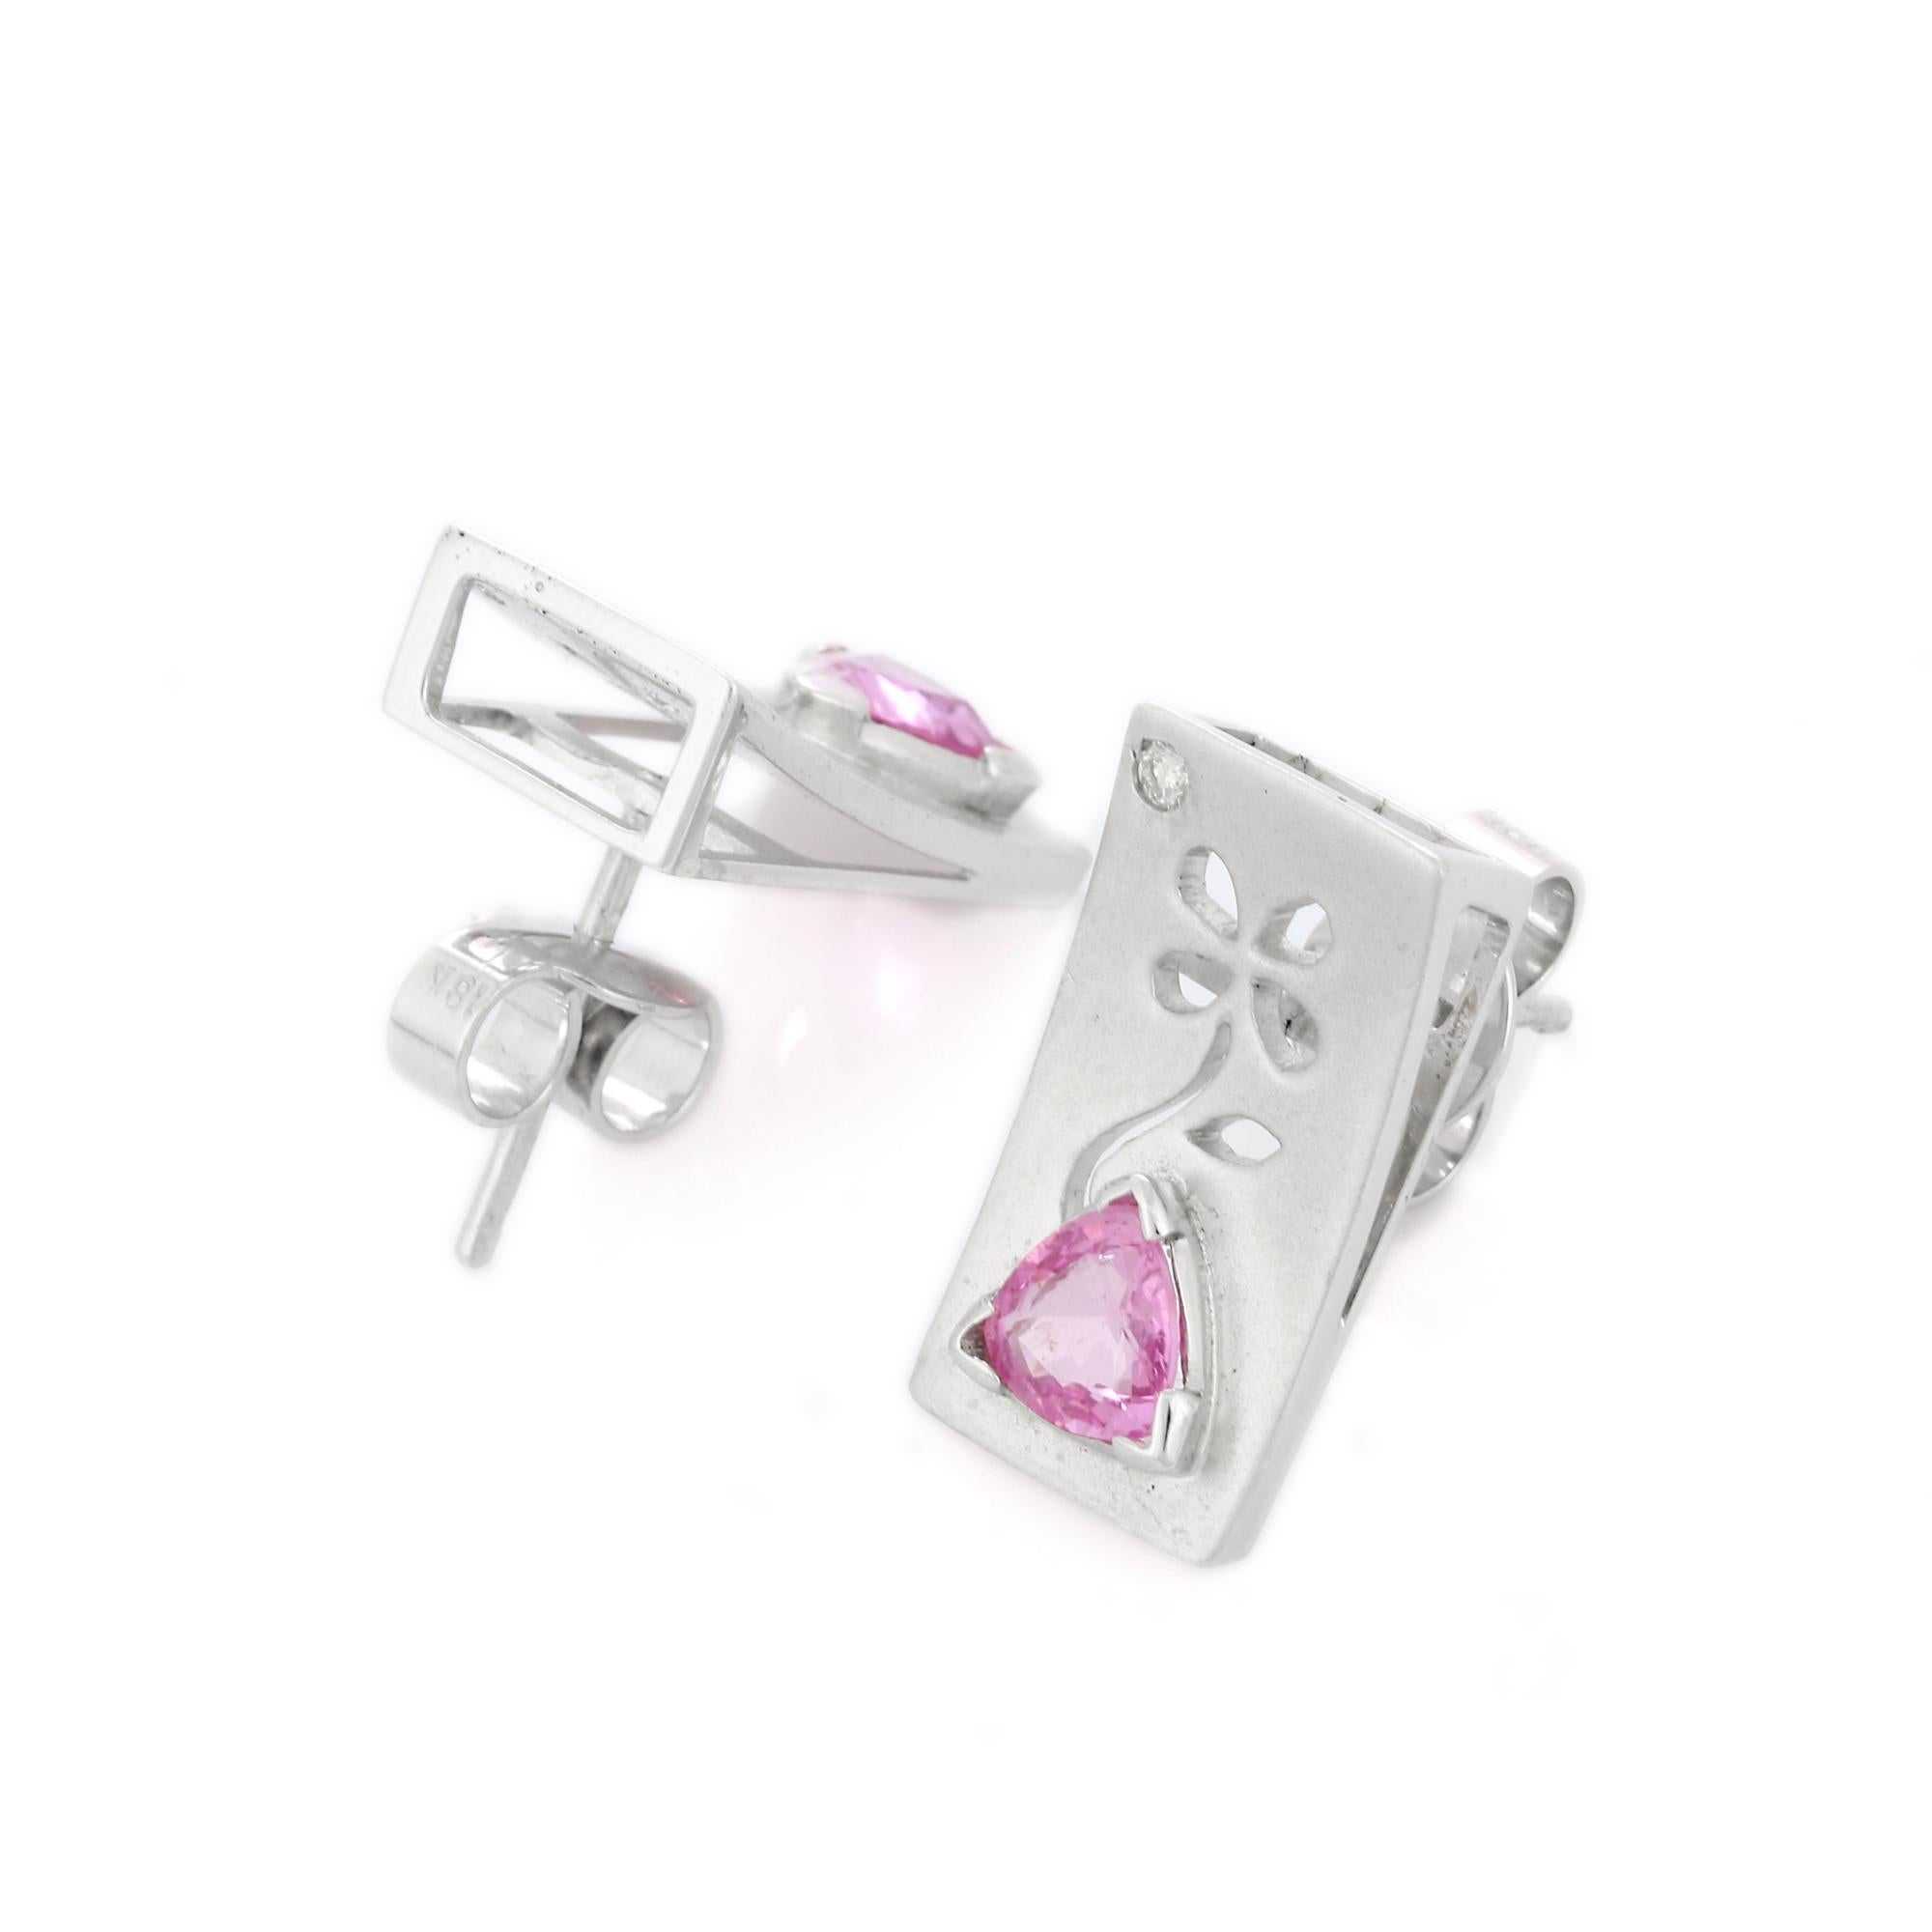 Studs create a subtle beauty while showcasing the colors of the natural precious gemstones and illuminating diamonds making a statement.

Trillion cut pink sapphire studs with diamonds in 18K gold. Embrace your look with these stunning pair of